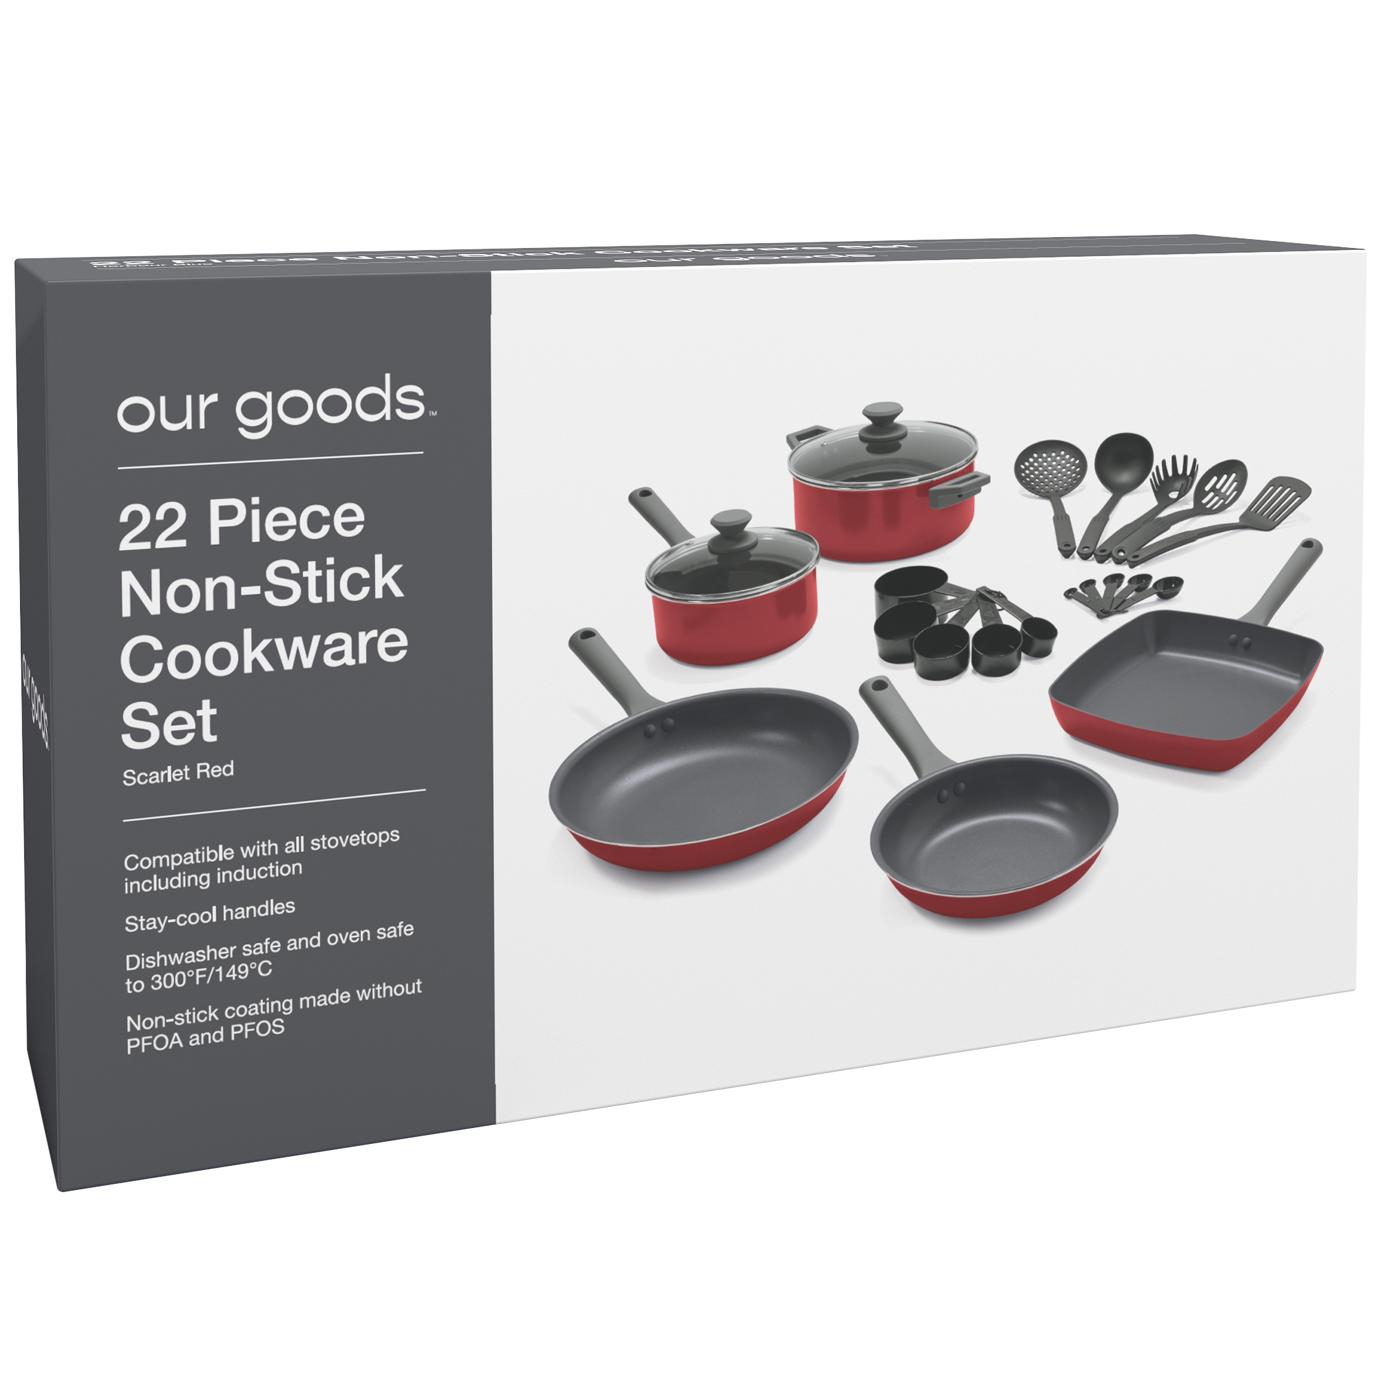 our goods Non-Stick Cookware Set - Scarlet Red; image 2 of 2